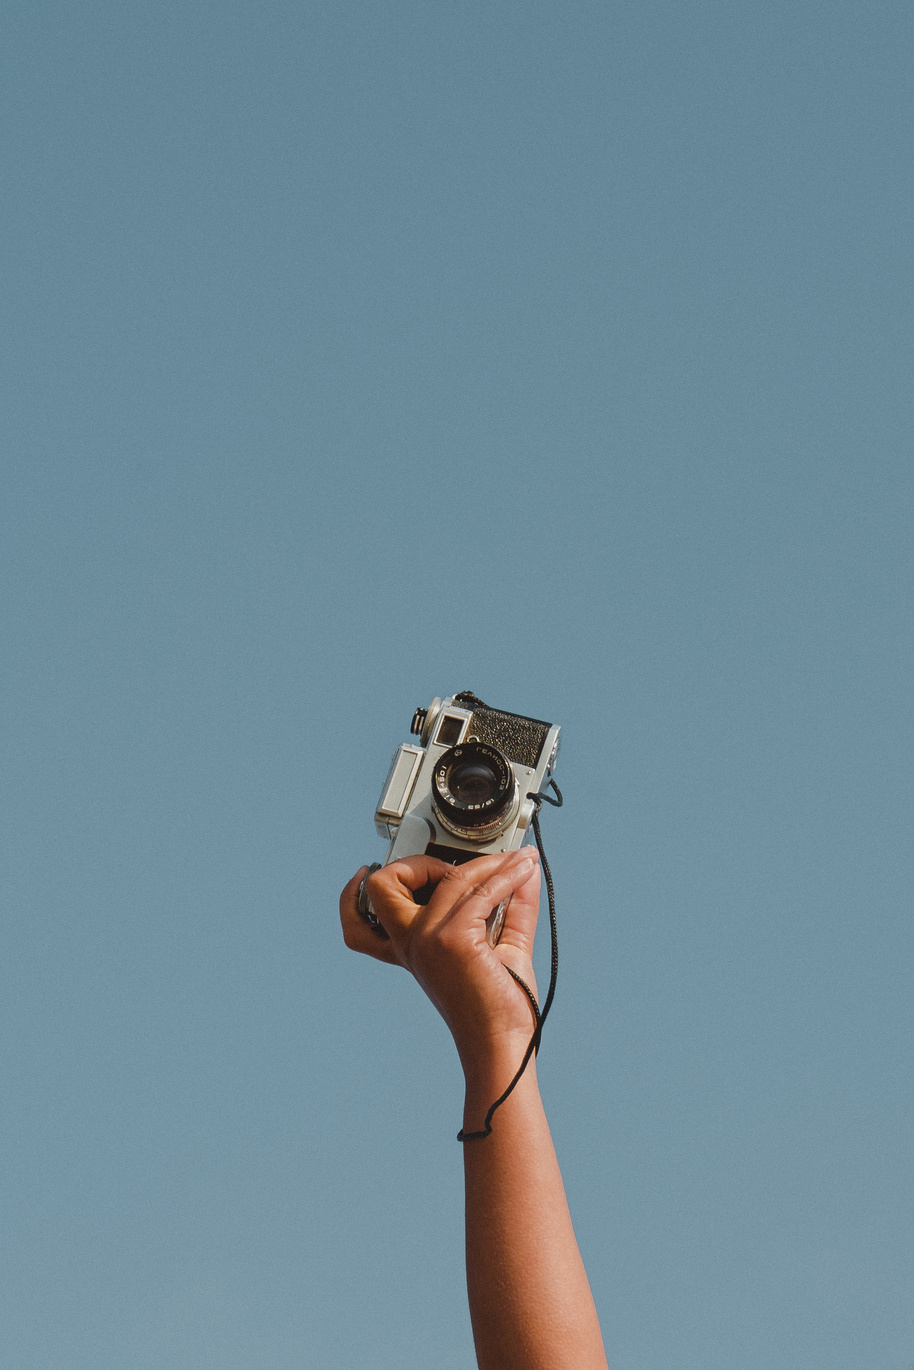 Person's Hand Holding a Vintage Camera against the Sky